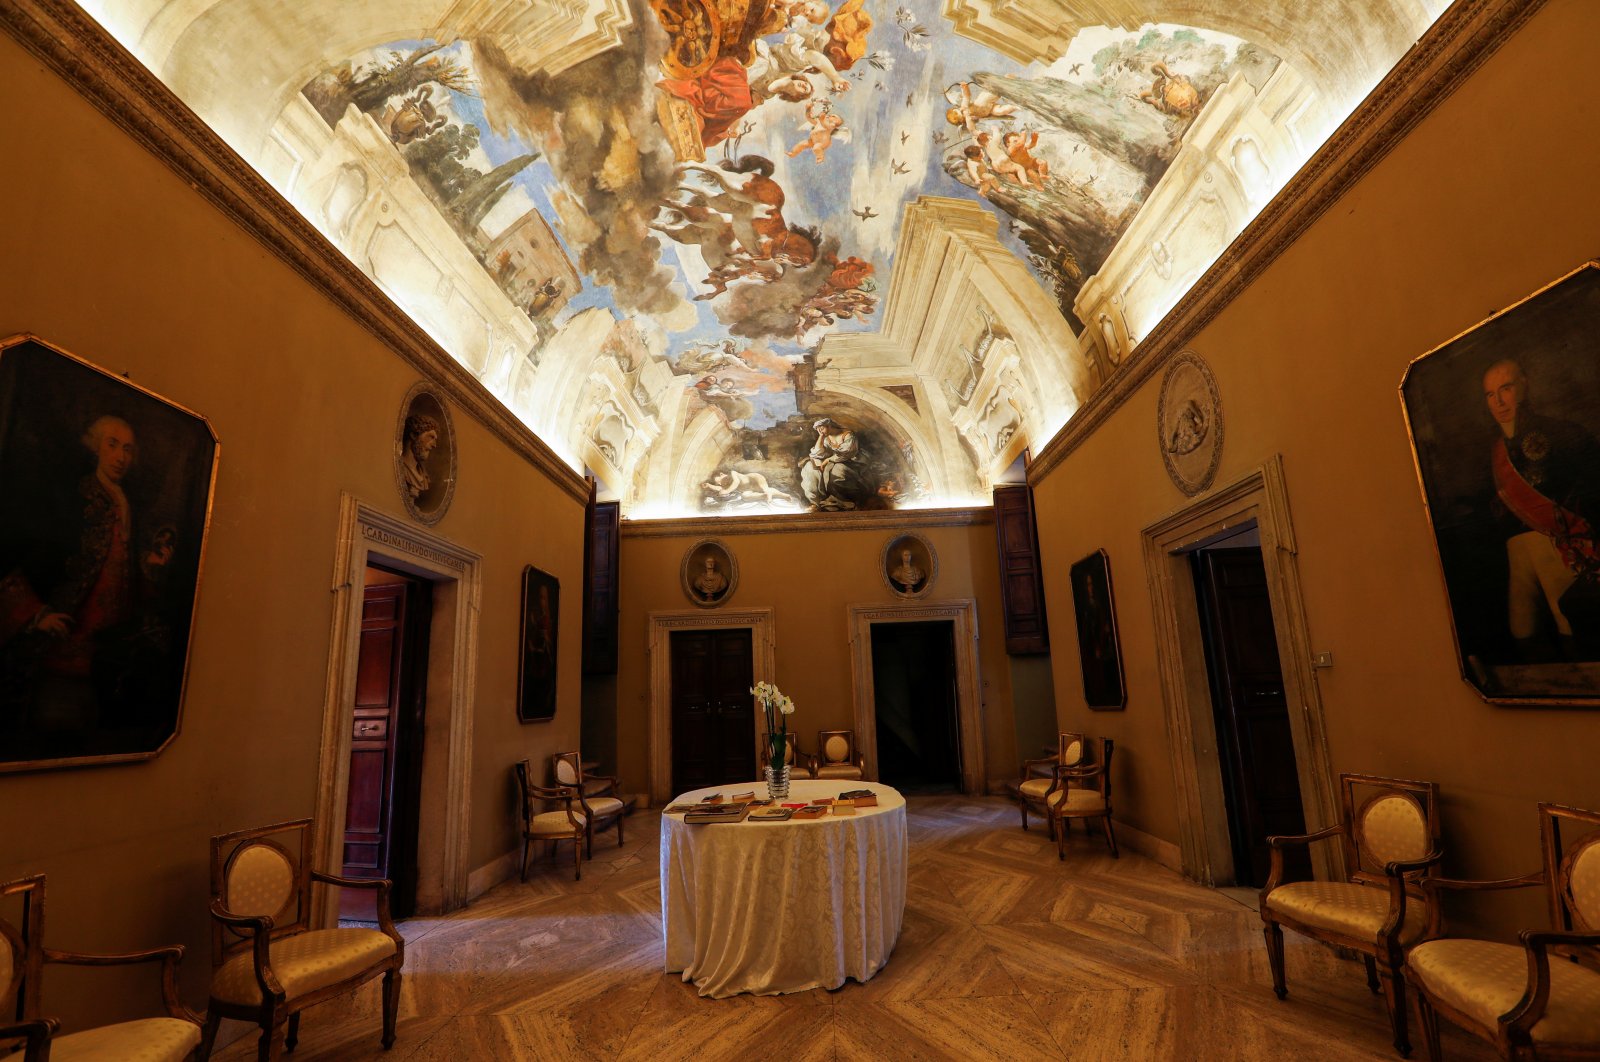 A general view shows a room, with frescoes on the ceiling by Guercino, inside Villa Aurora, in Rome, Italy, Nov. 16, 2021. (REUTERS)